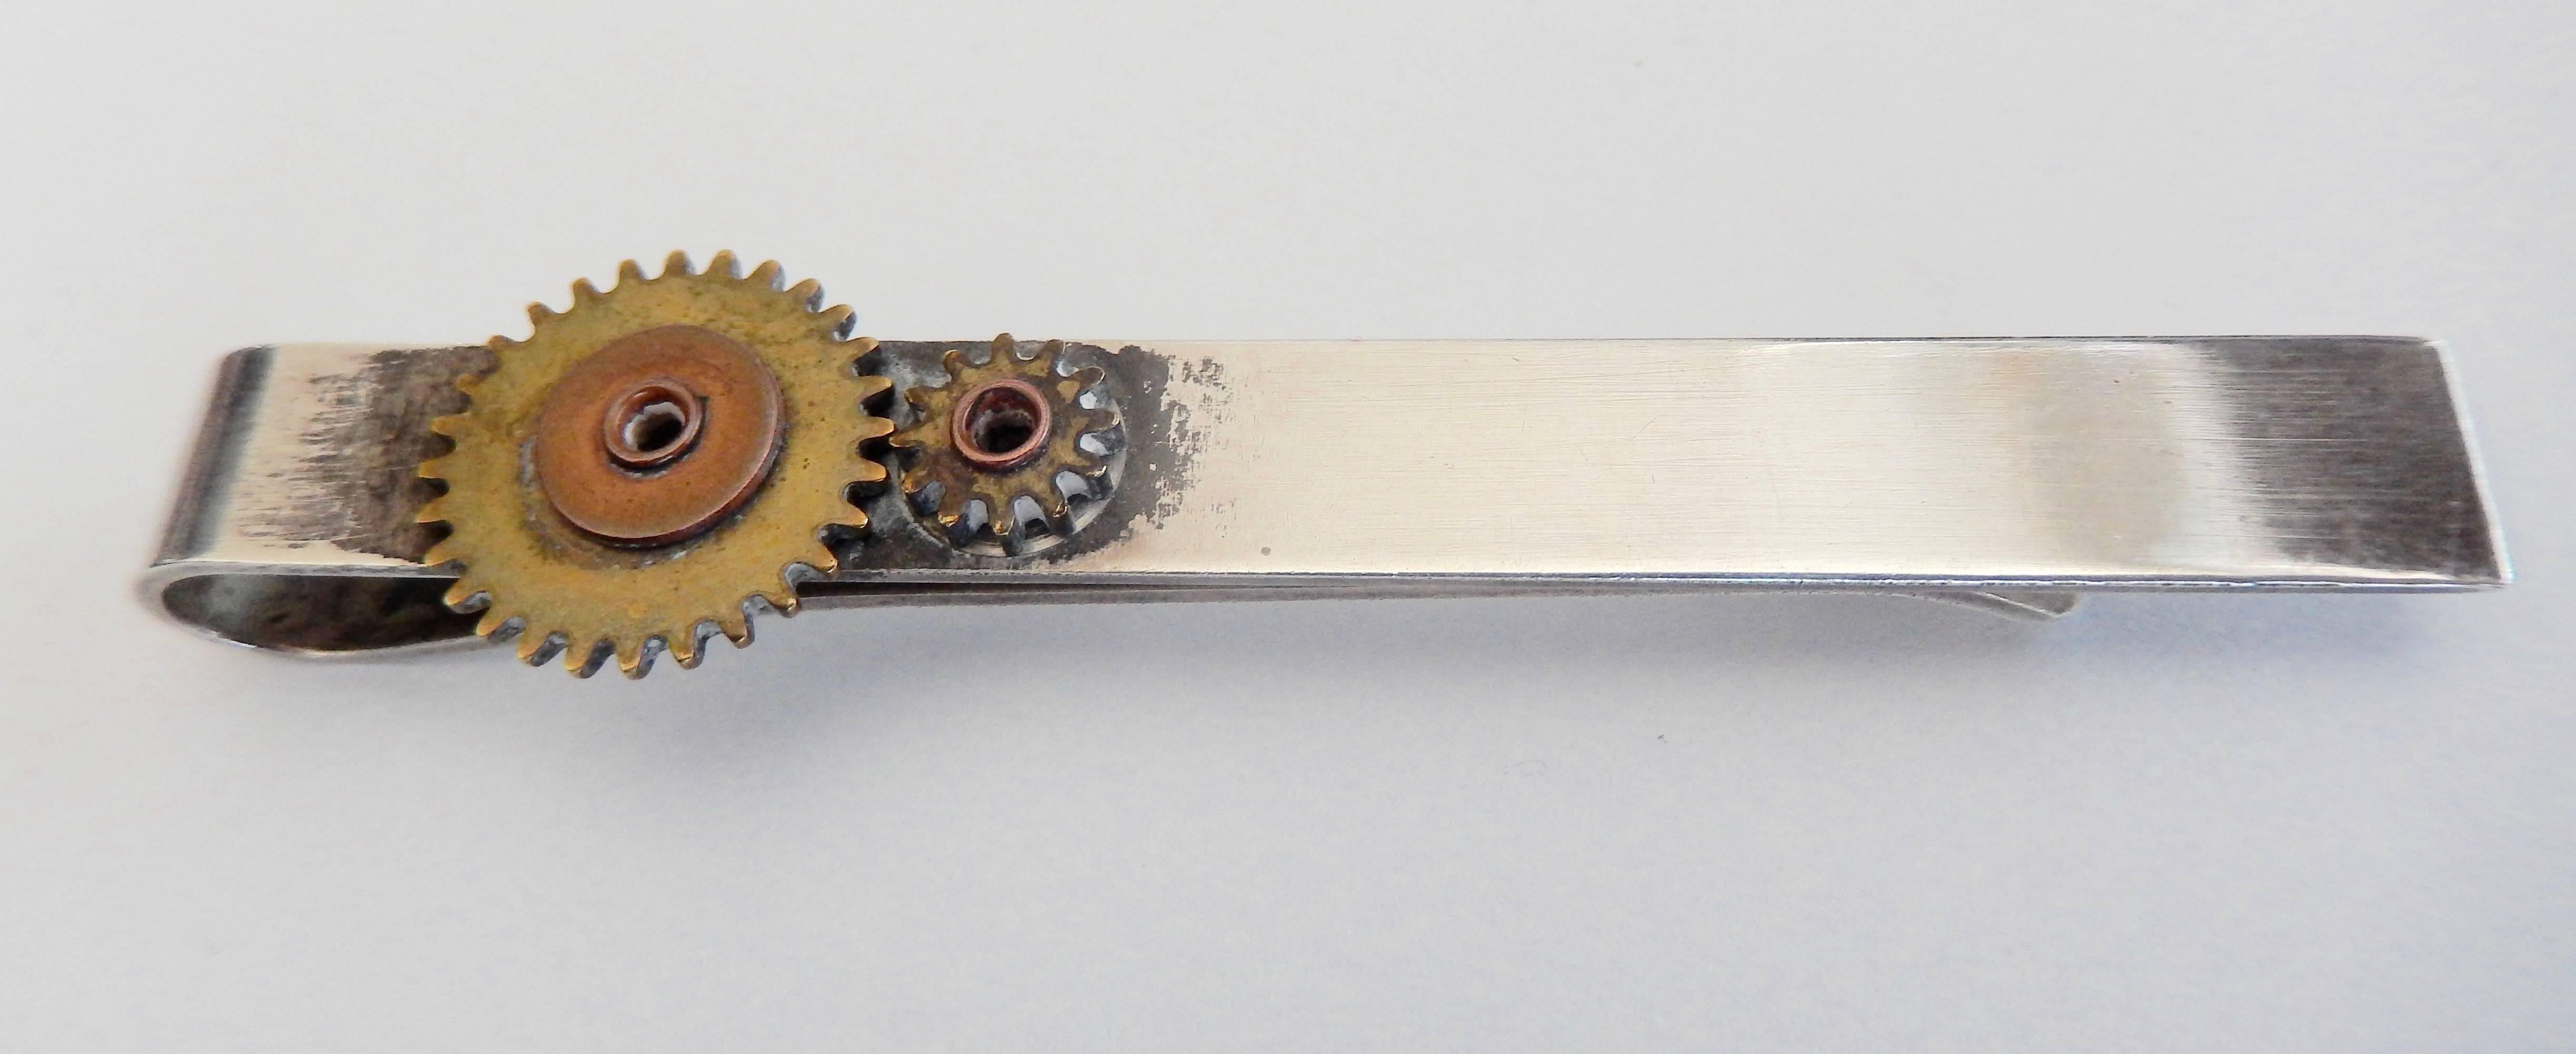 An ingeniously designed tie clip of interlocking gears by the New York artist Francisco Rebajes.  A brilliant example of the Machine Age aesthetic in the decorative arts of the period.  Marked 